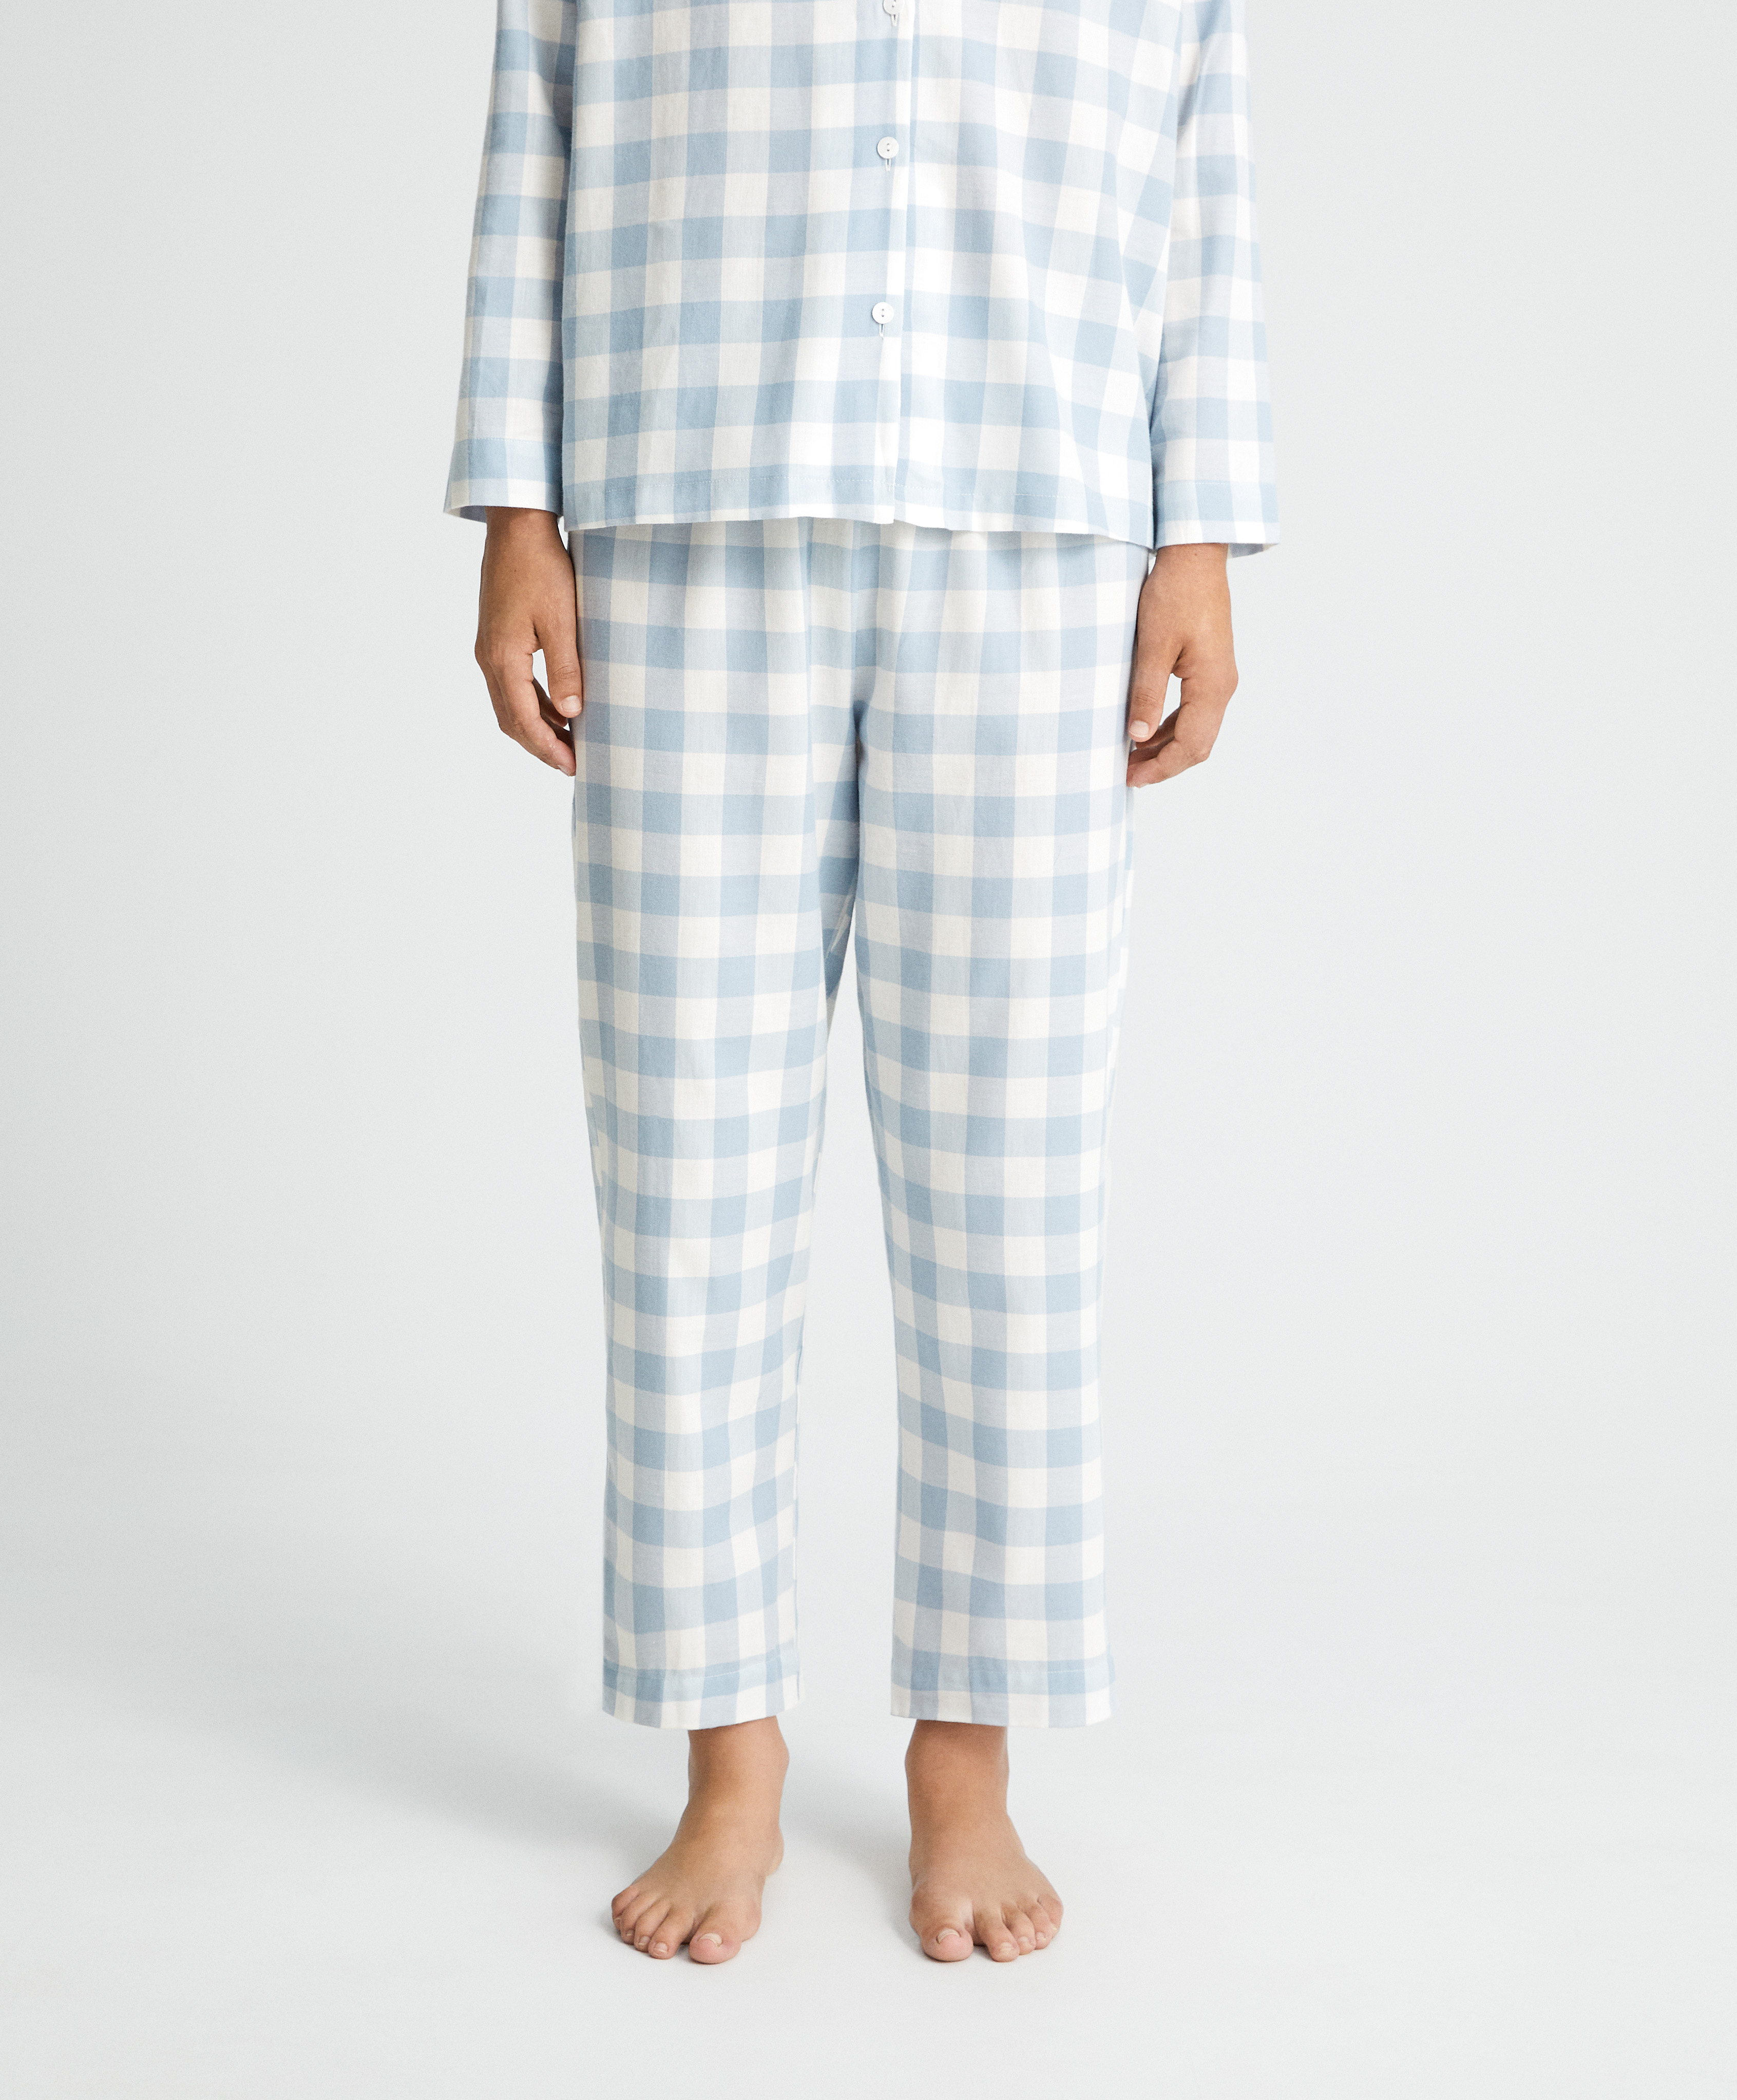 Checked 100% cotton trousers